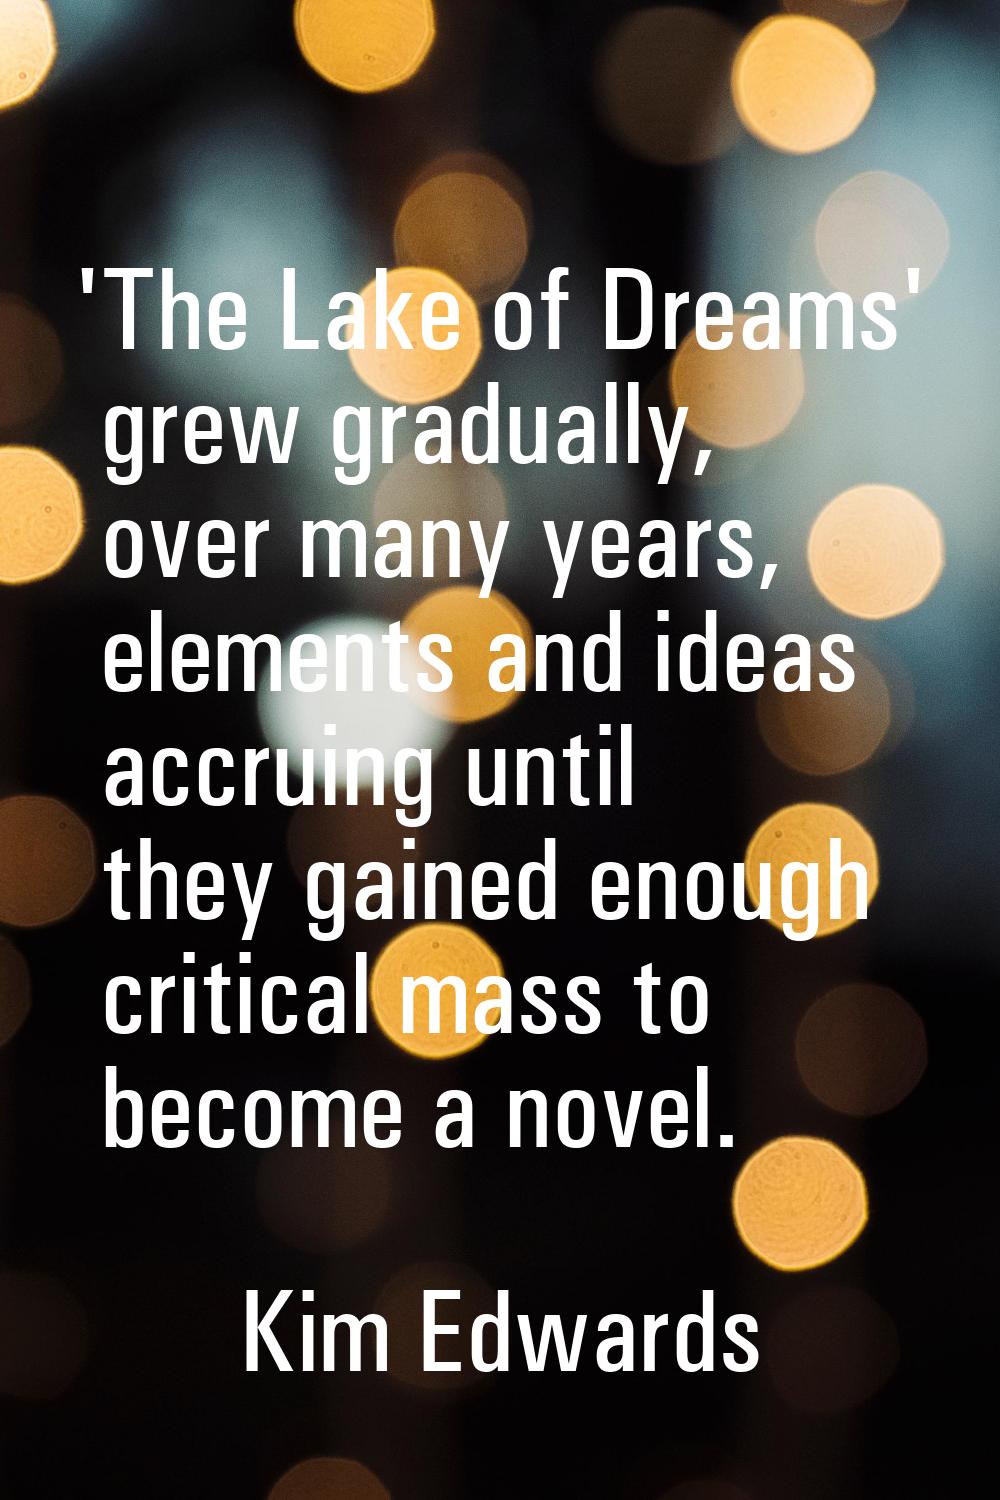 'The Lake of Dreams' grew gradually, over many years, elements and ideas accruing until they gained